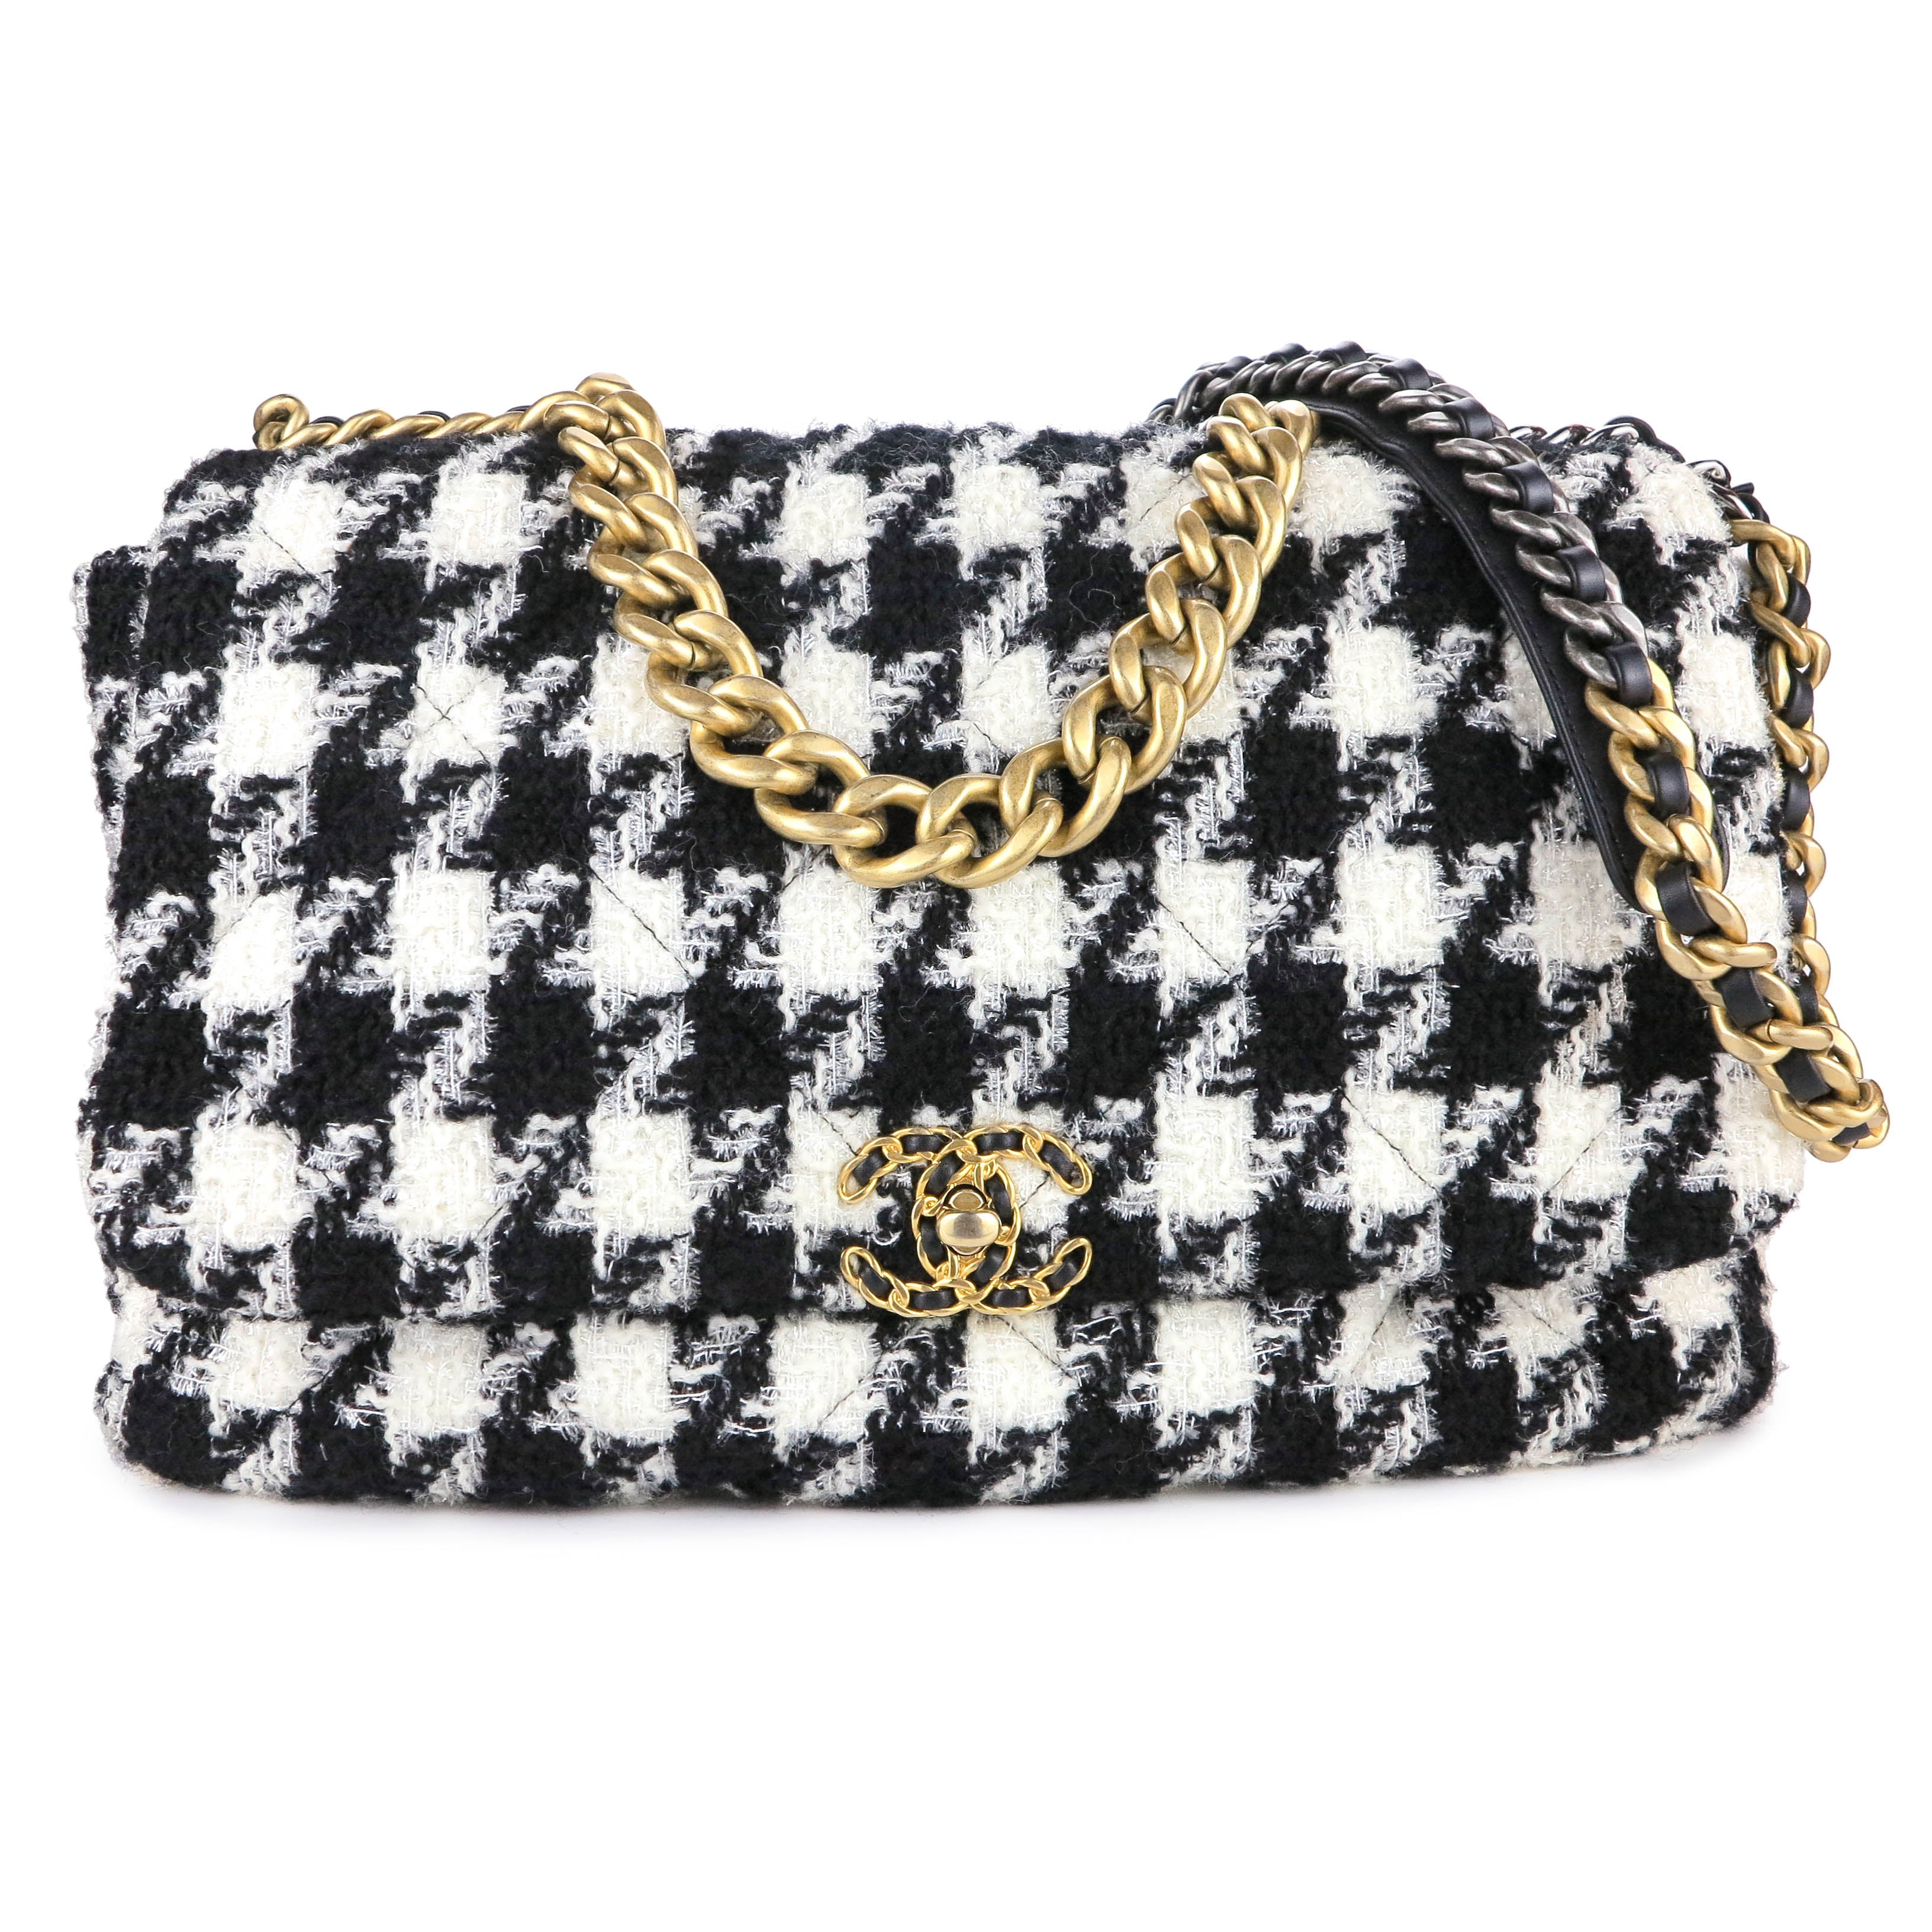 CHANEL CHANEL 19 Maxi Flap Bag in 19K Houndstooth Tweed Black White